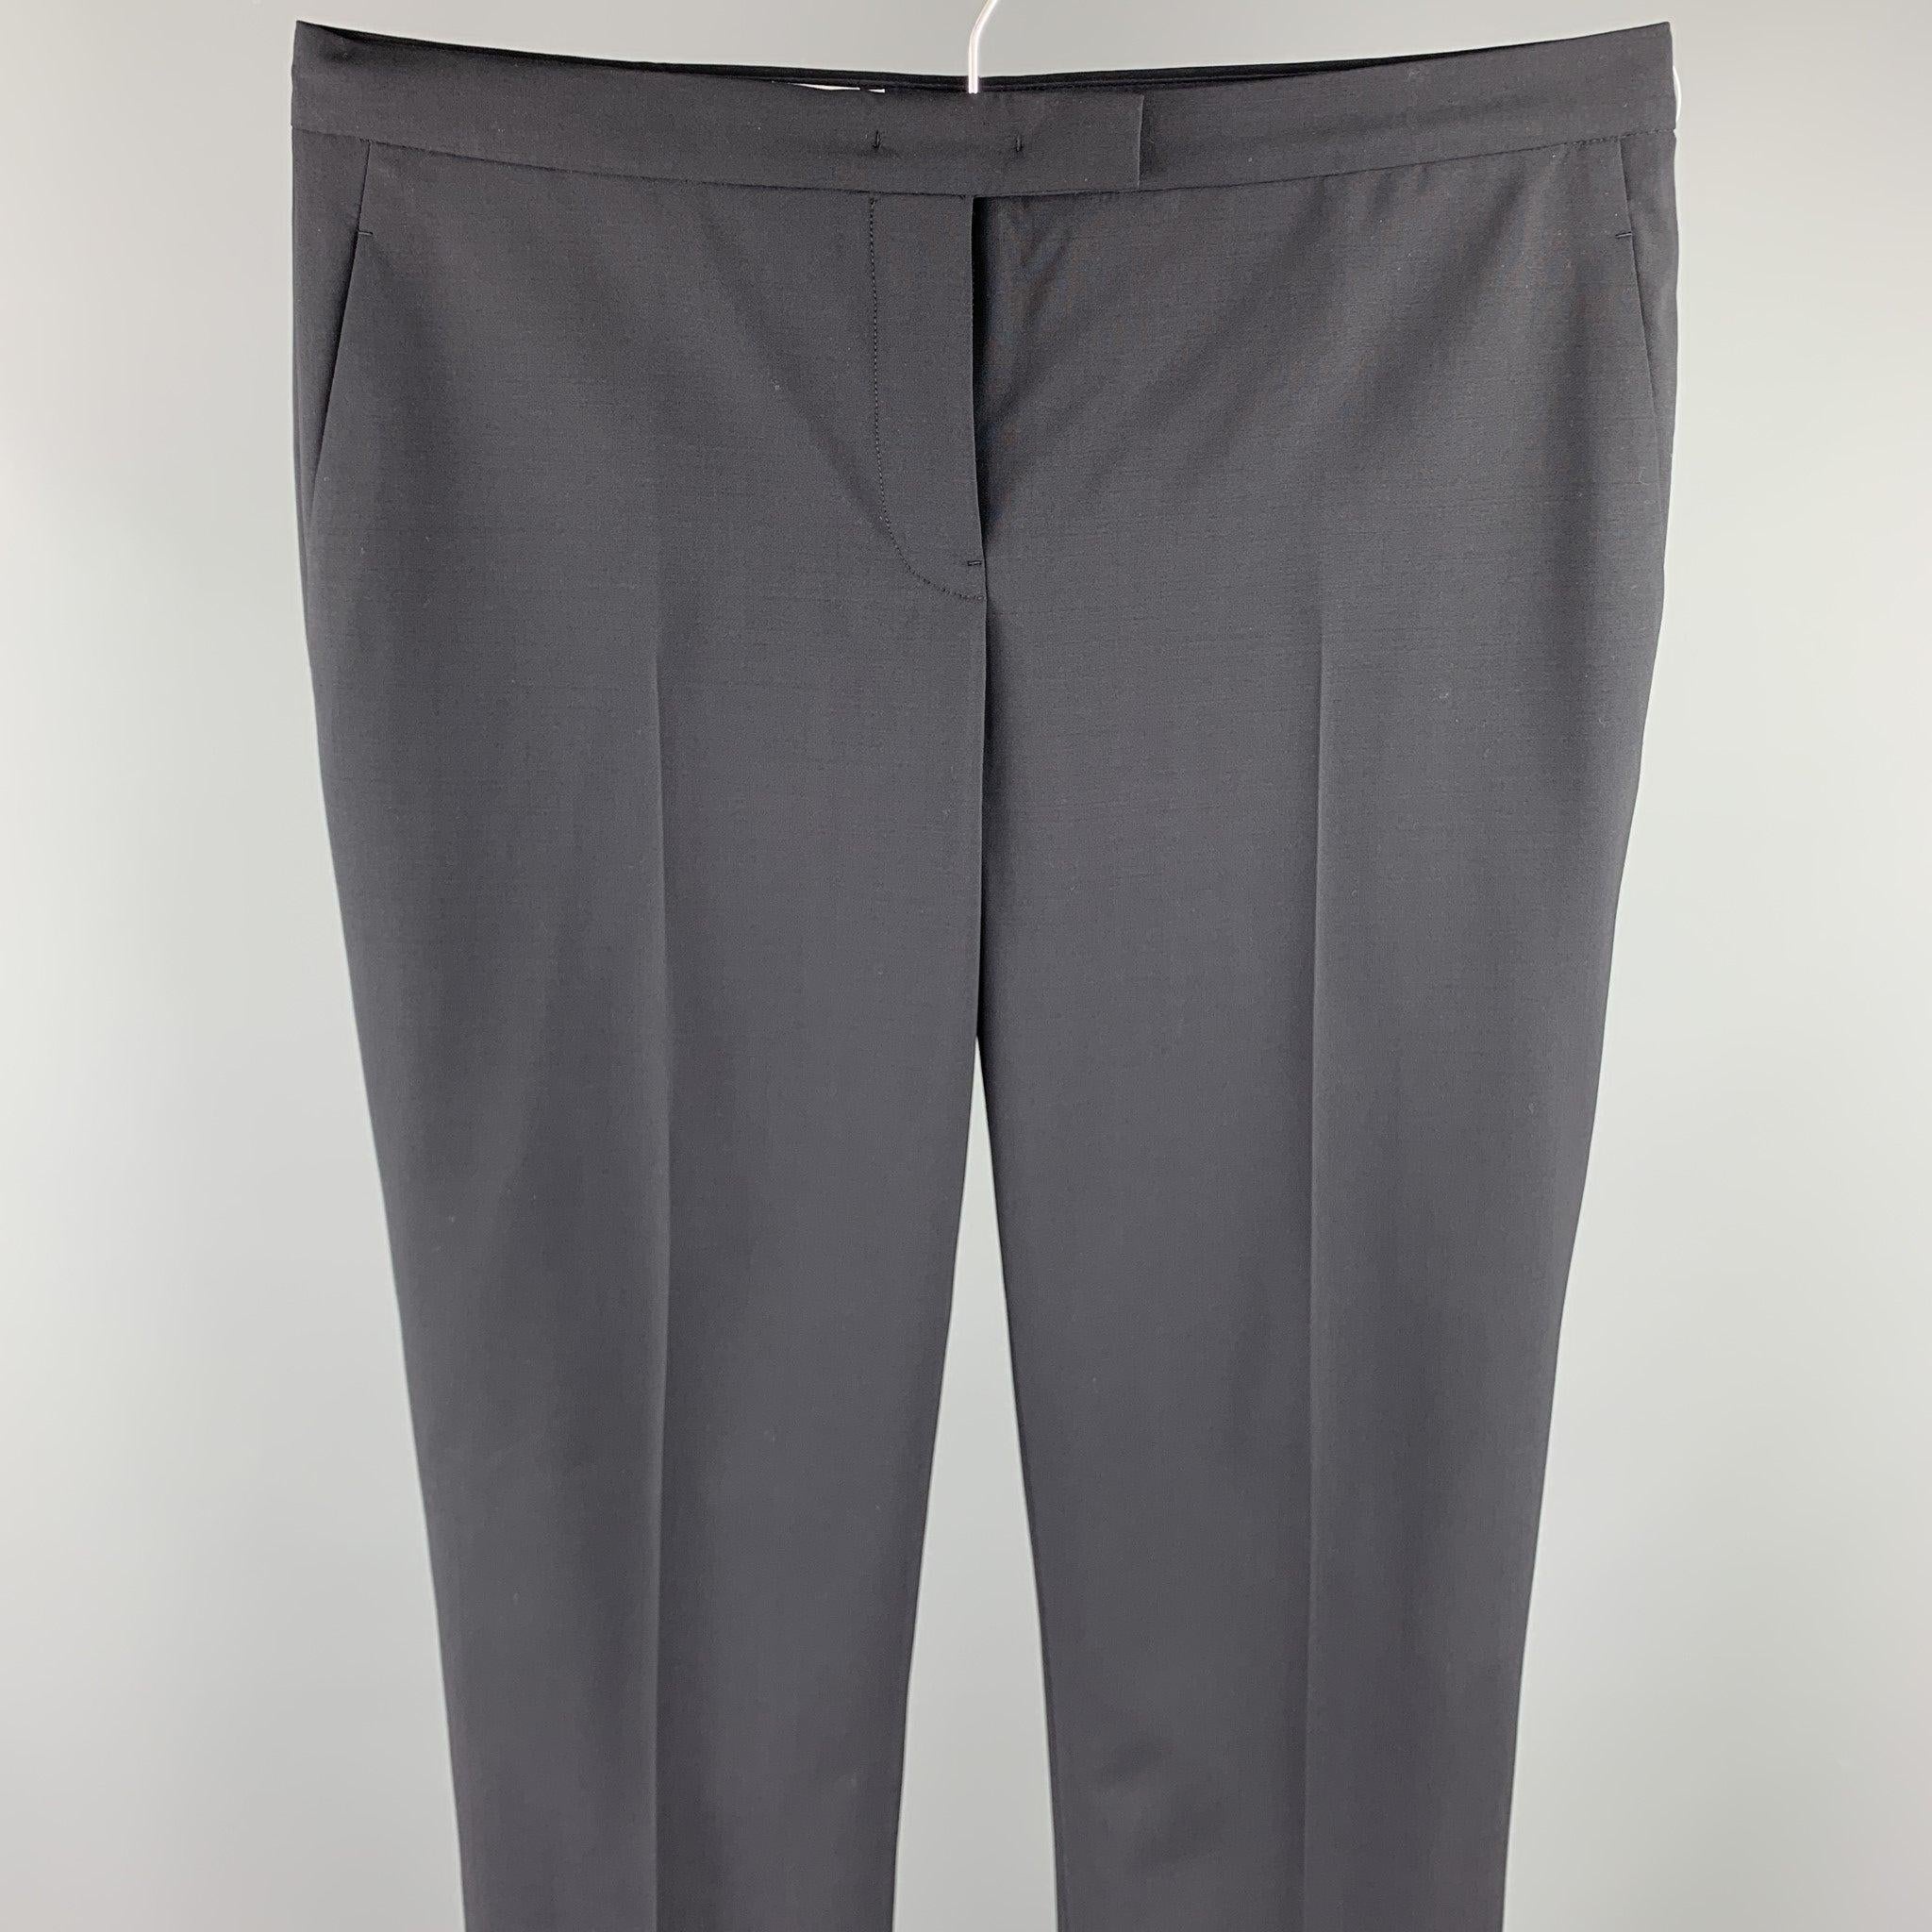 JIL SANDER dress pants comes in a black fabric featuring a straight leg and a zip fly closure. Made in Italy.Excellent
Pre-Owned Condition. 

Marked:   38 

Measurements: 
  Waist: 32 inches 
Rise: 7.5 inches 
Inseam: 31 inches 
  
  
 
Reference: